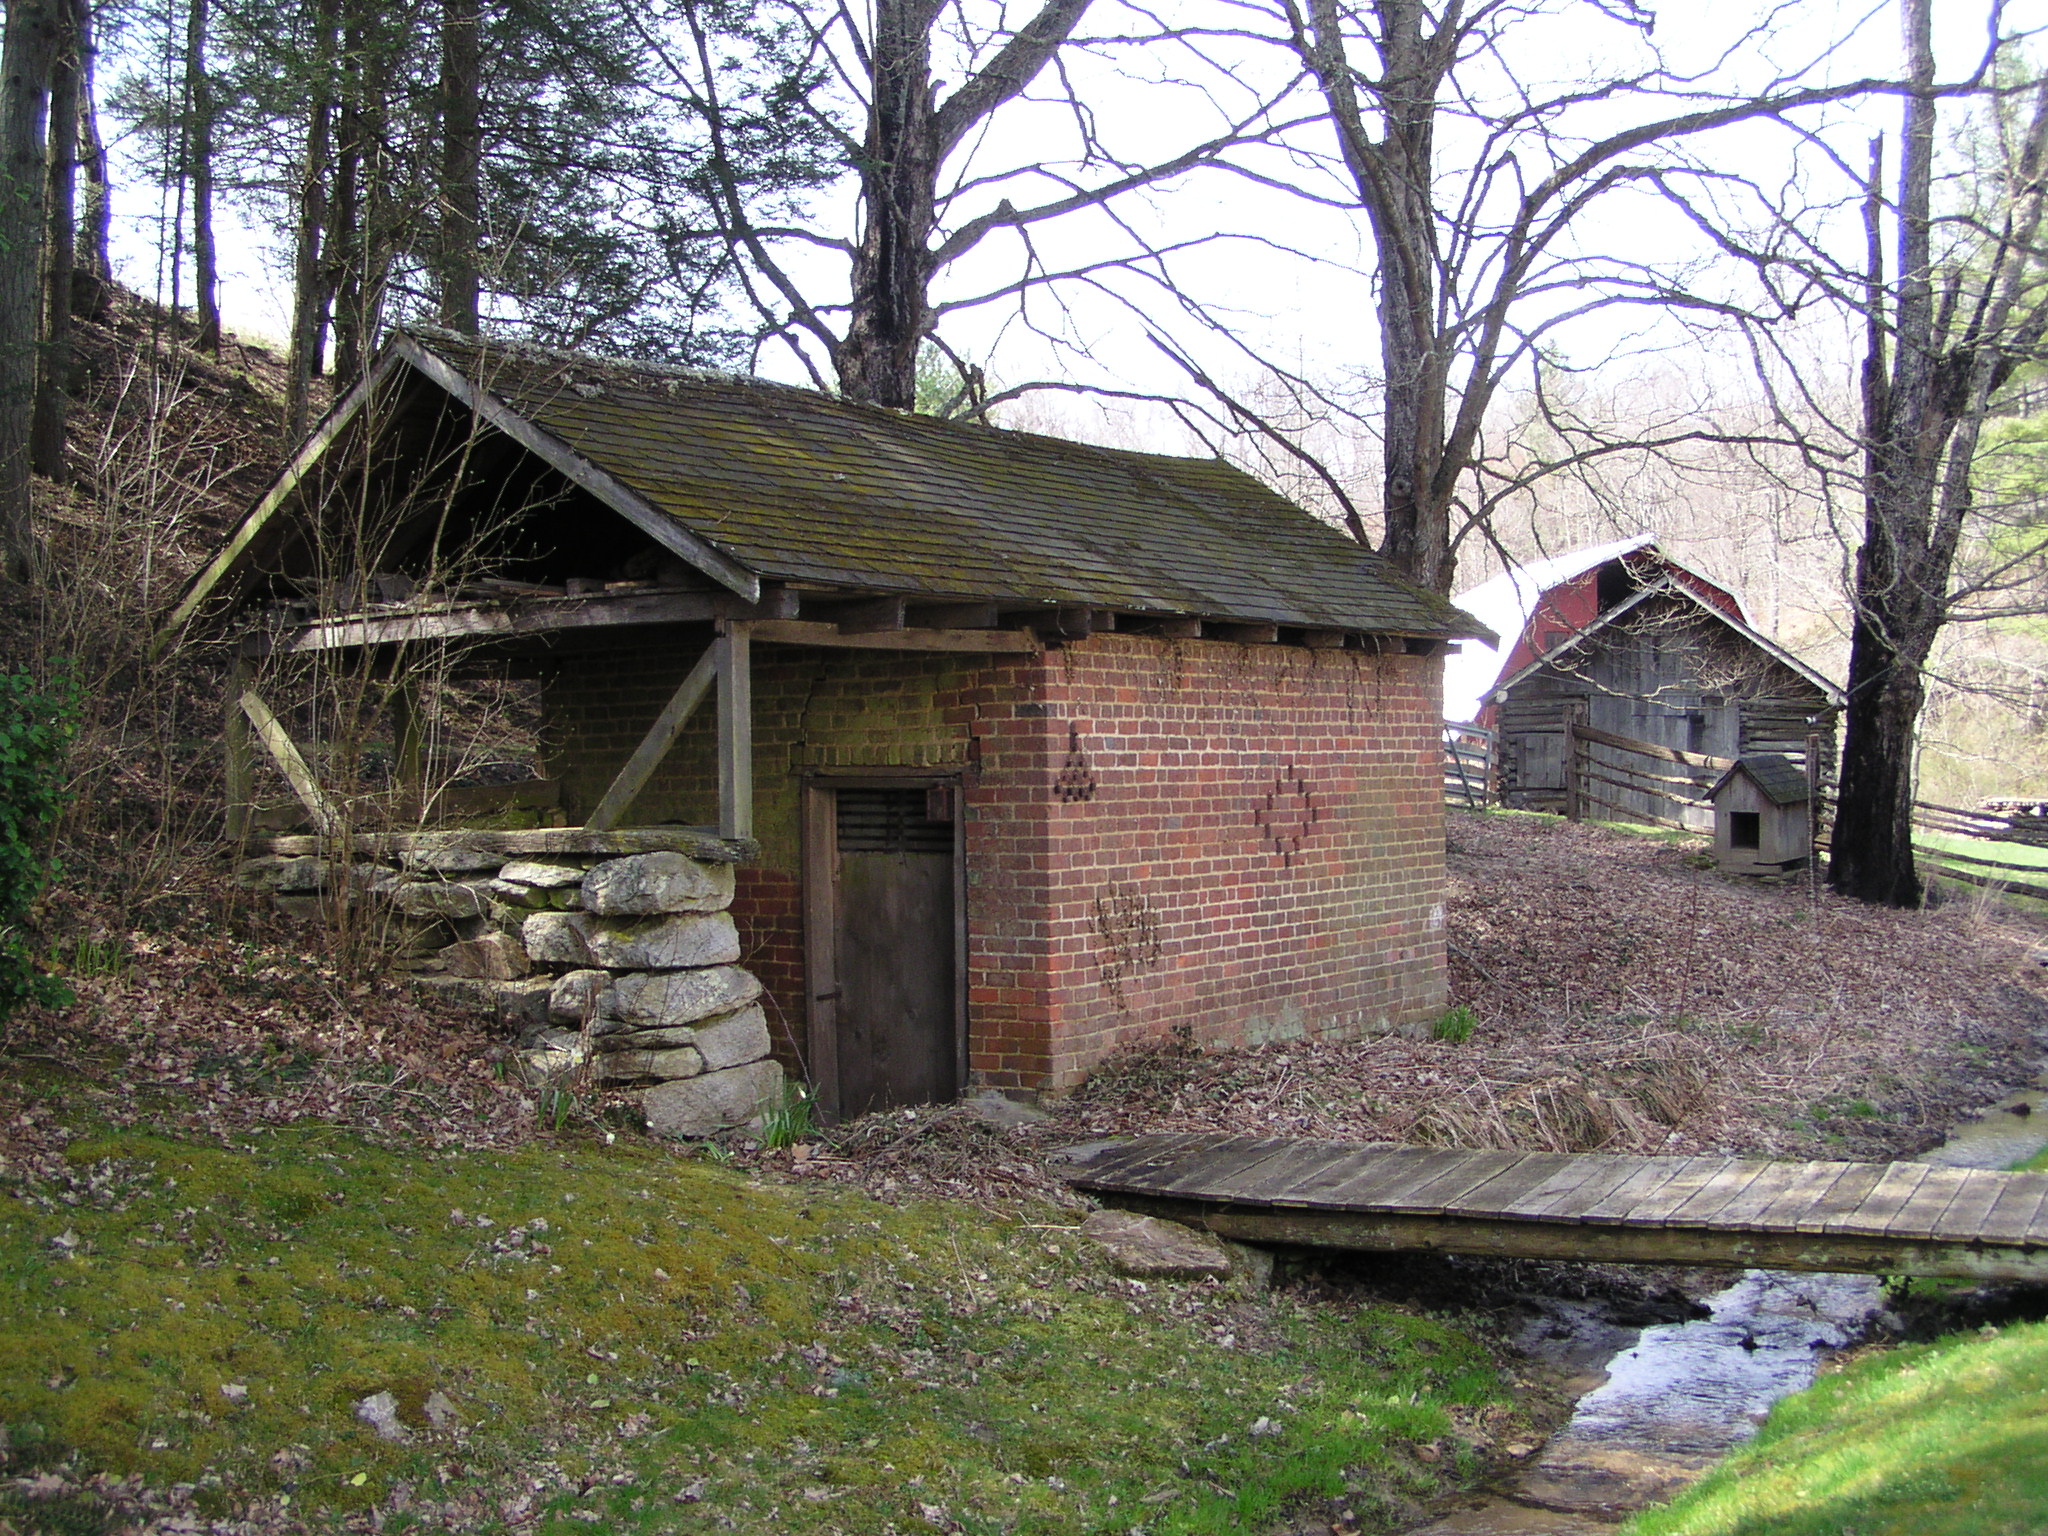 Springhouse. Photo credit: Mike Pulice/DHR, 2005